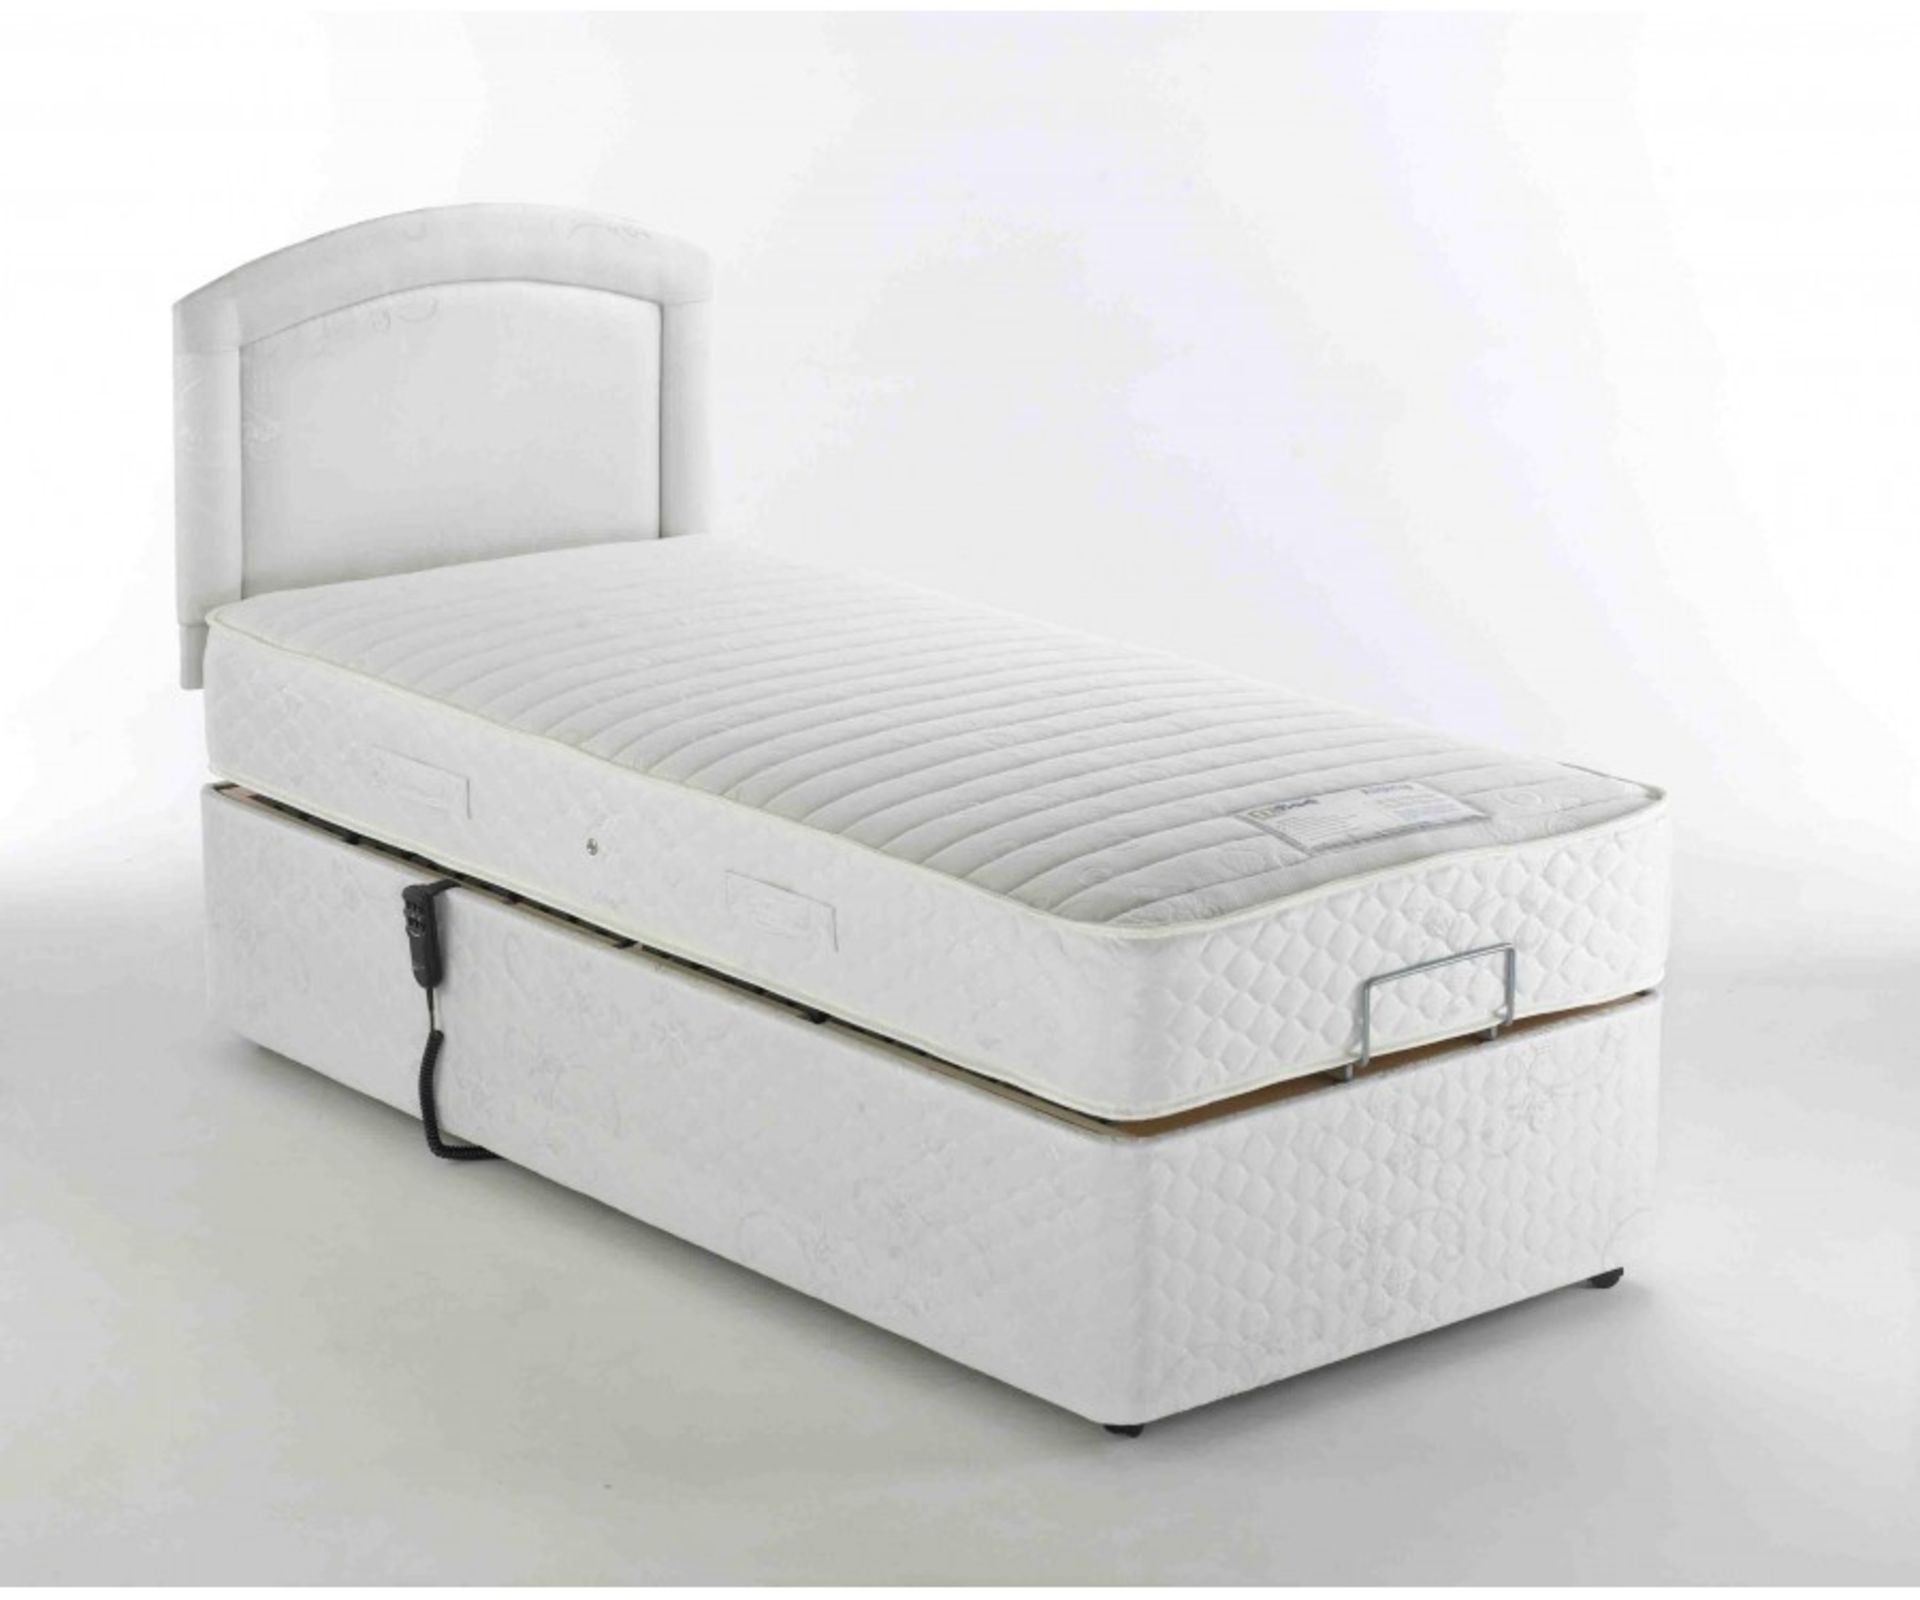 Brand new Alpina 2'6 adjustable electric bed with luxury pocket sprung mattress